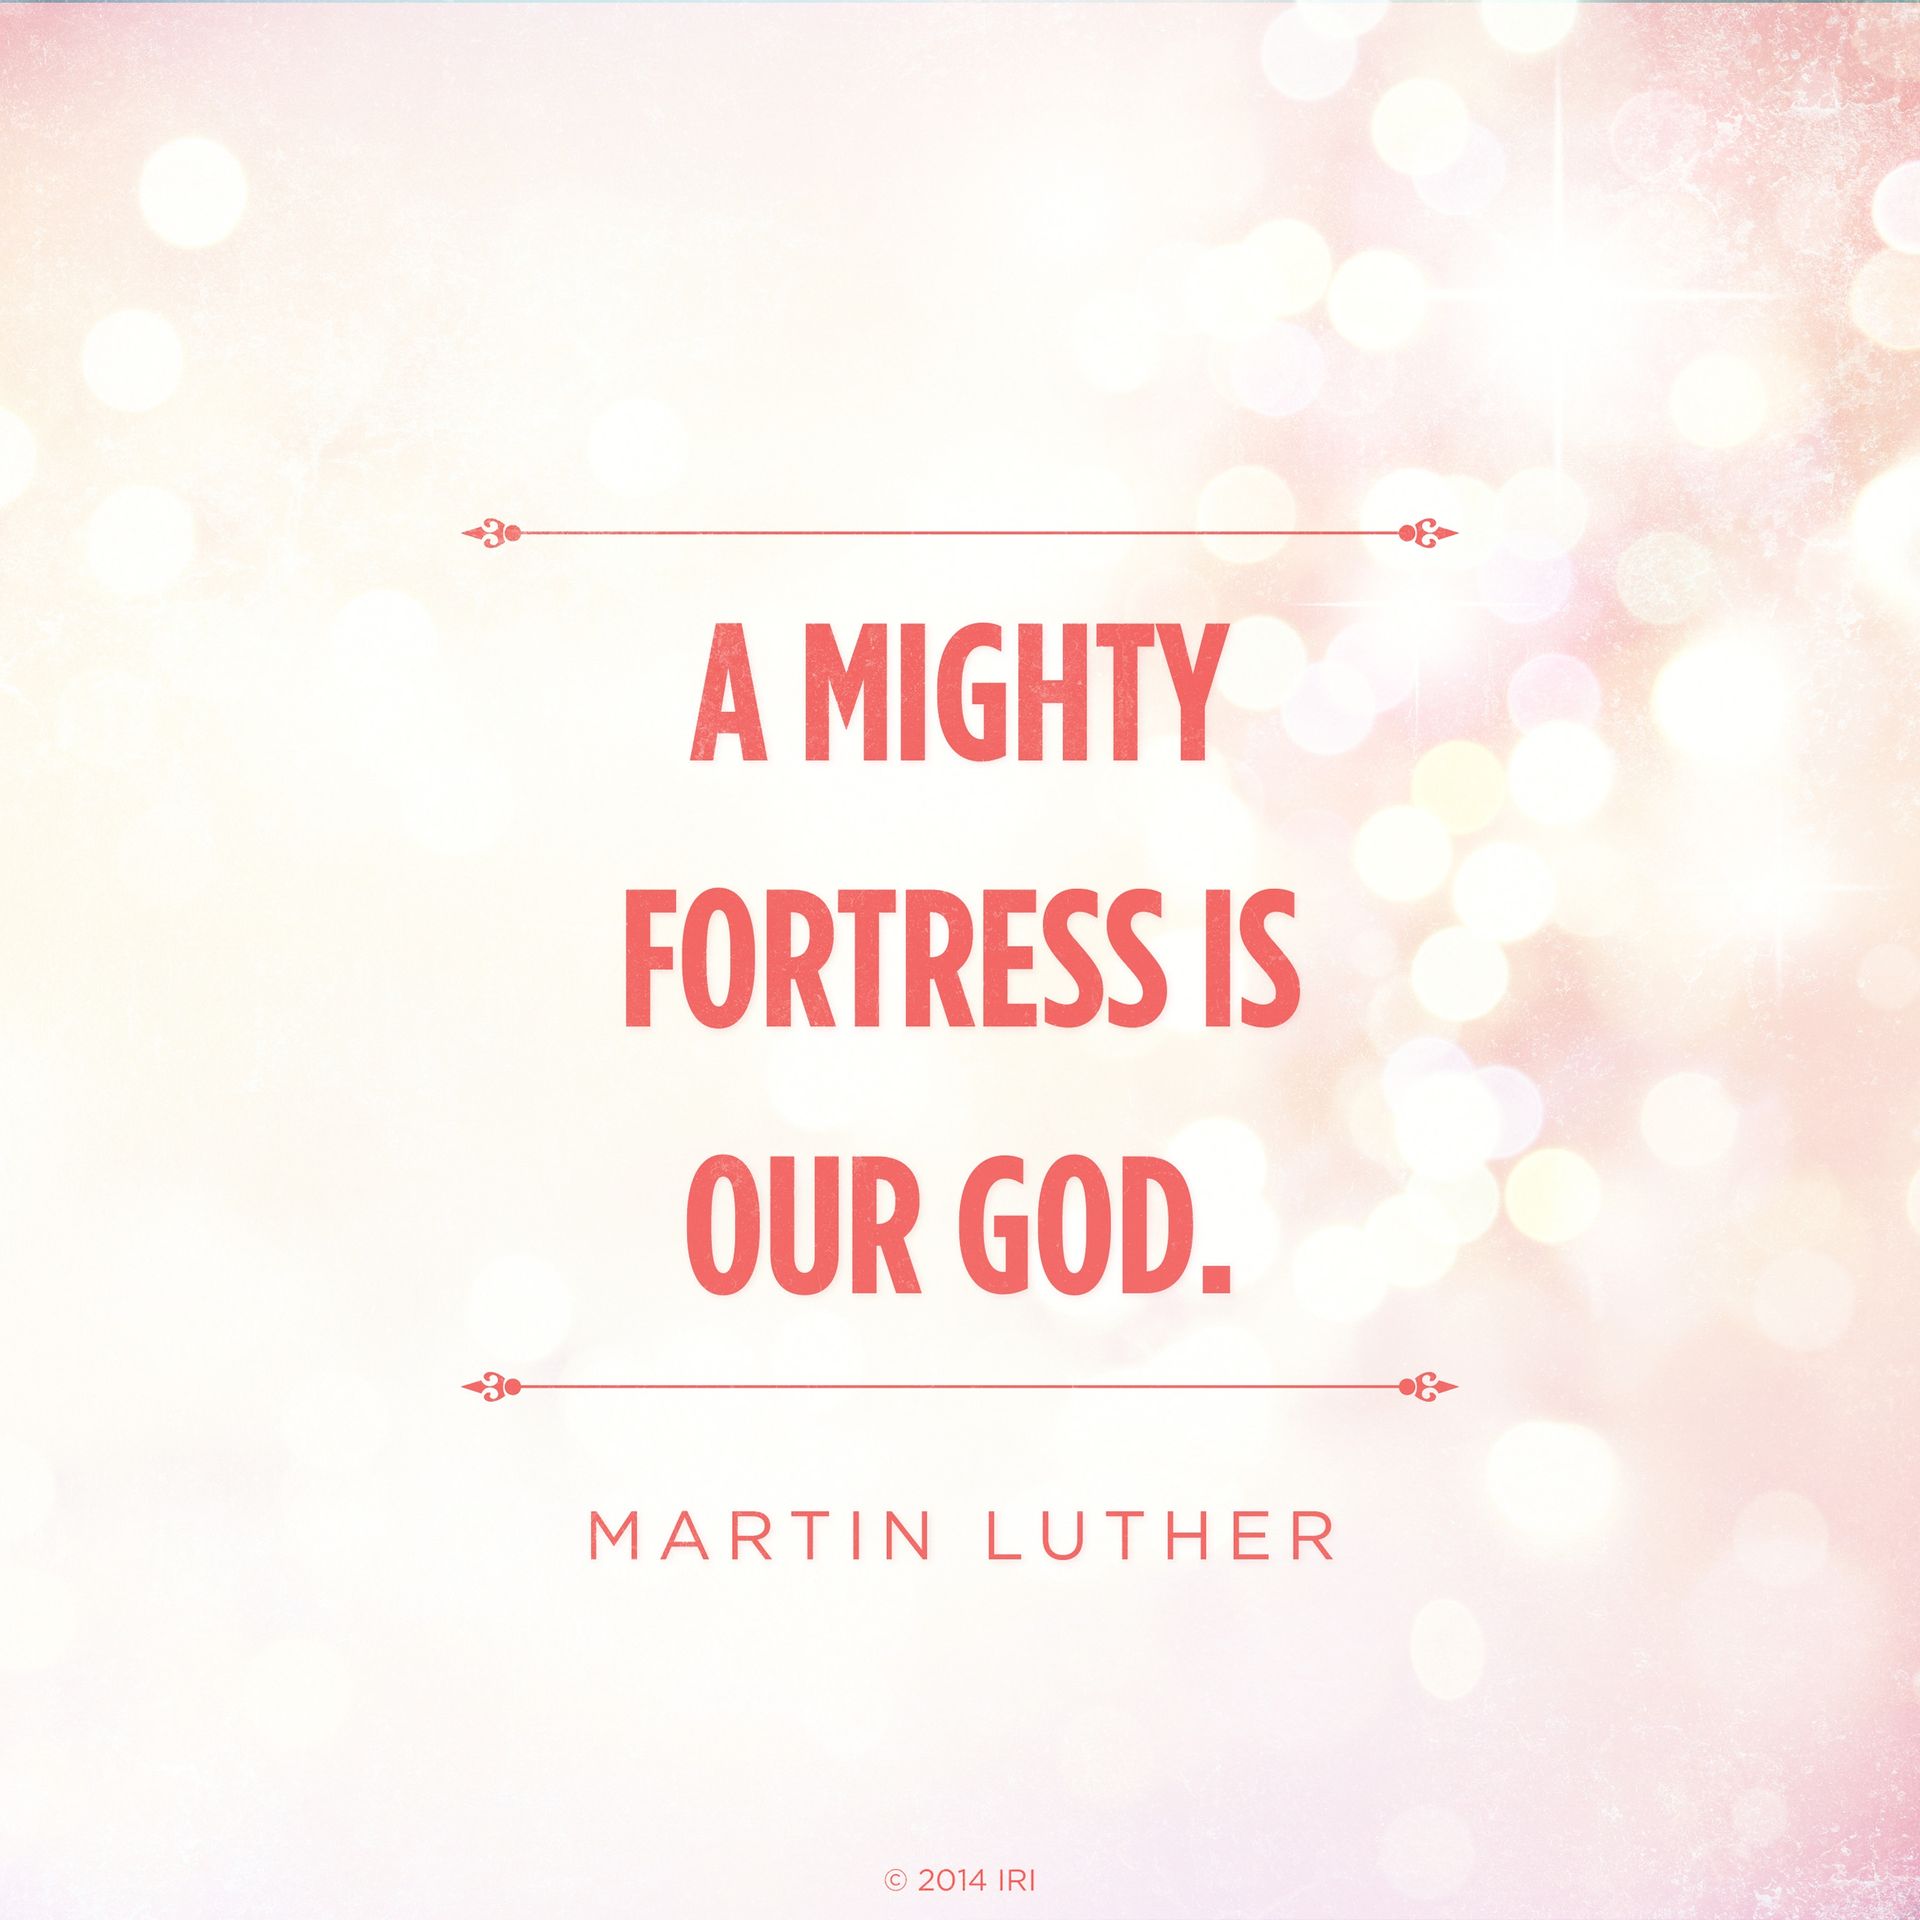 “A mighty fortress is our God.”—Martin Luther; Hymns, no. 68, “A Mighty Fortress Is Our God”